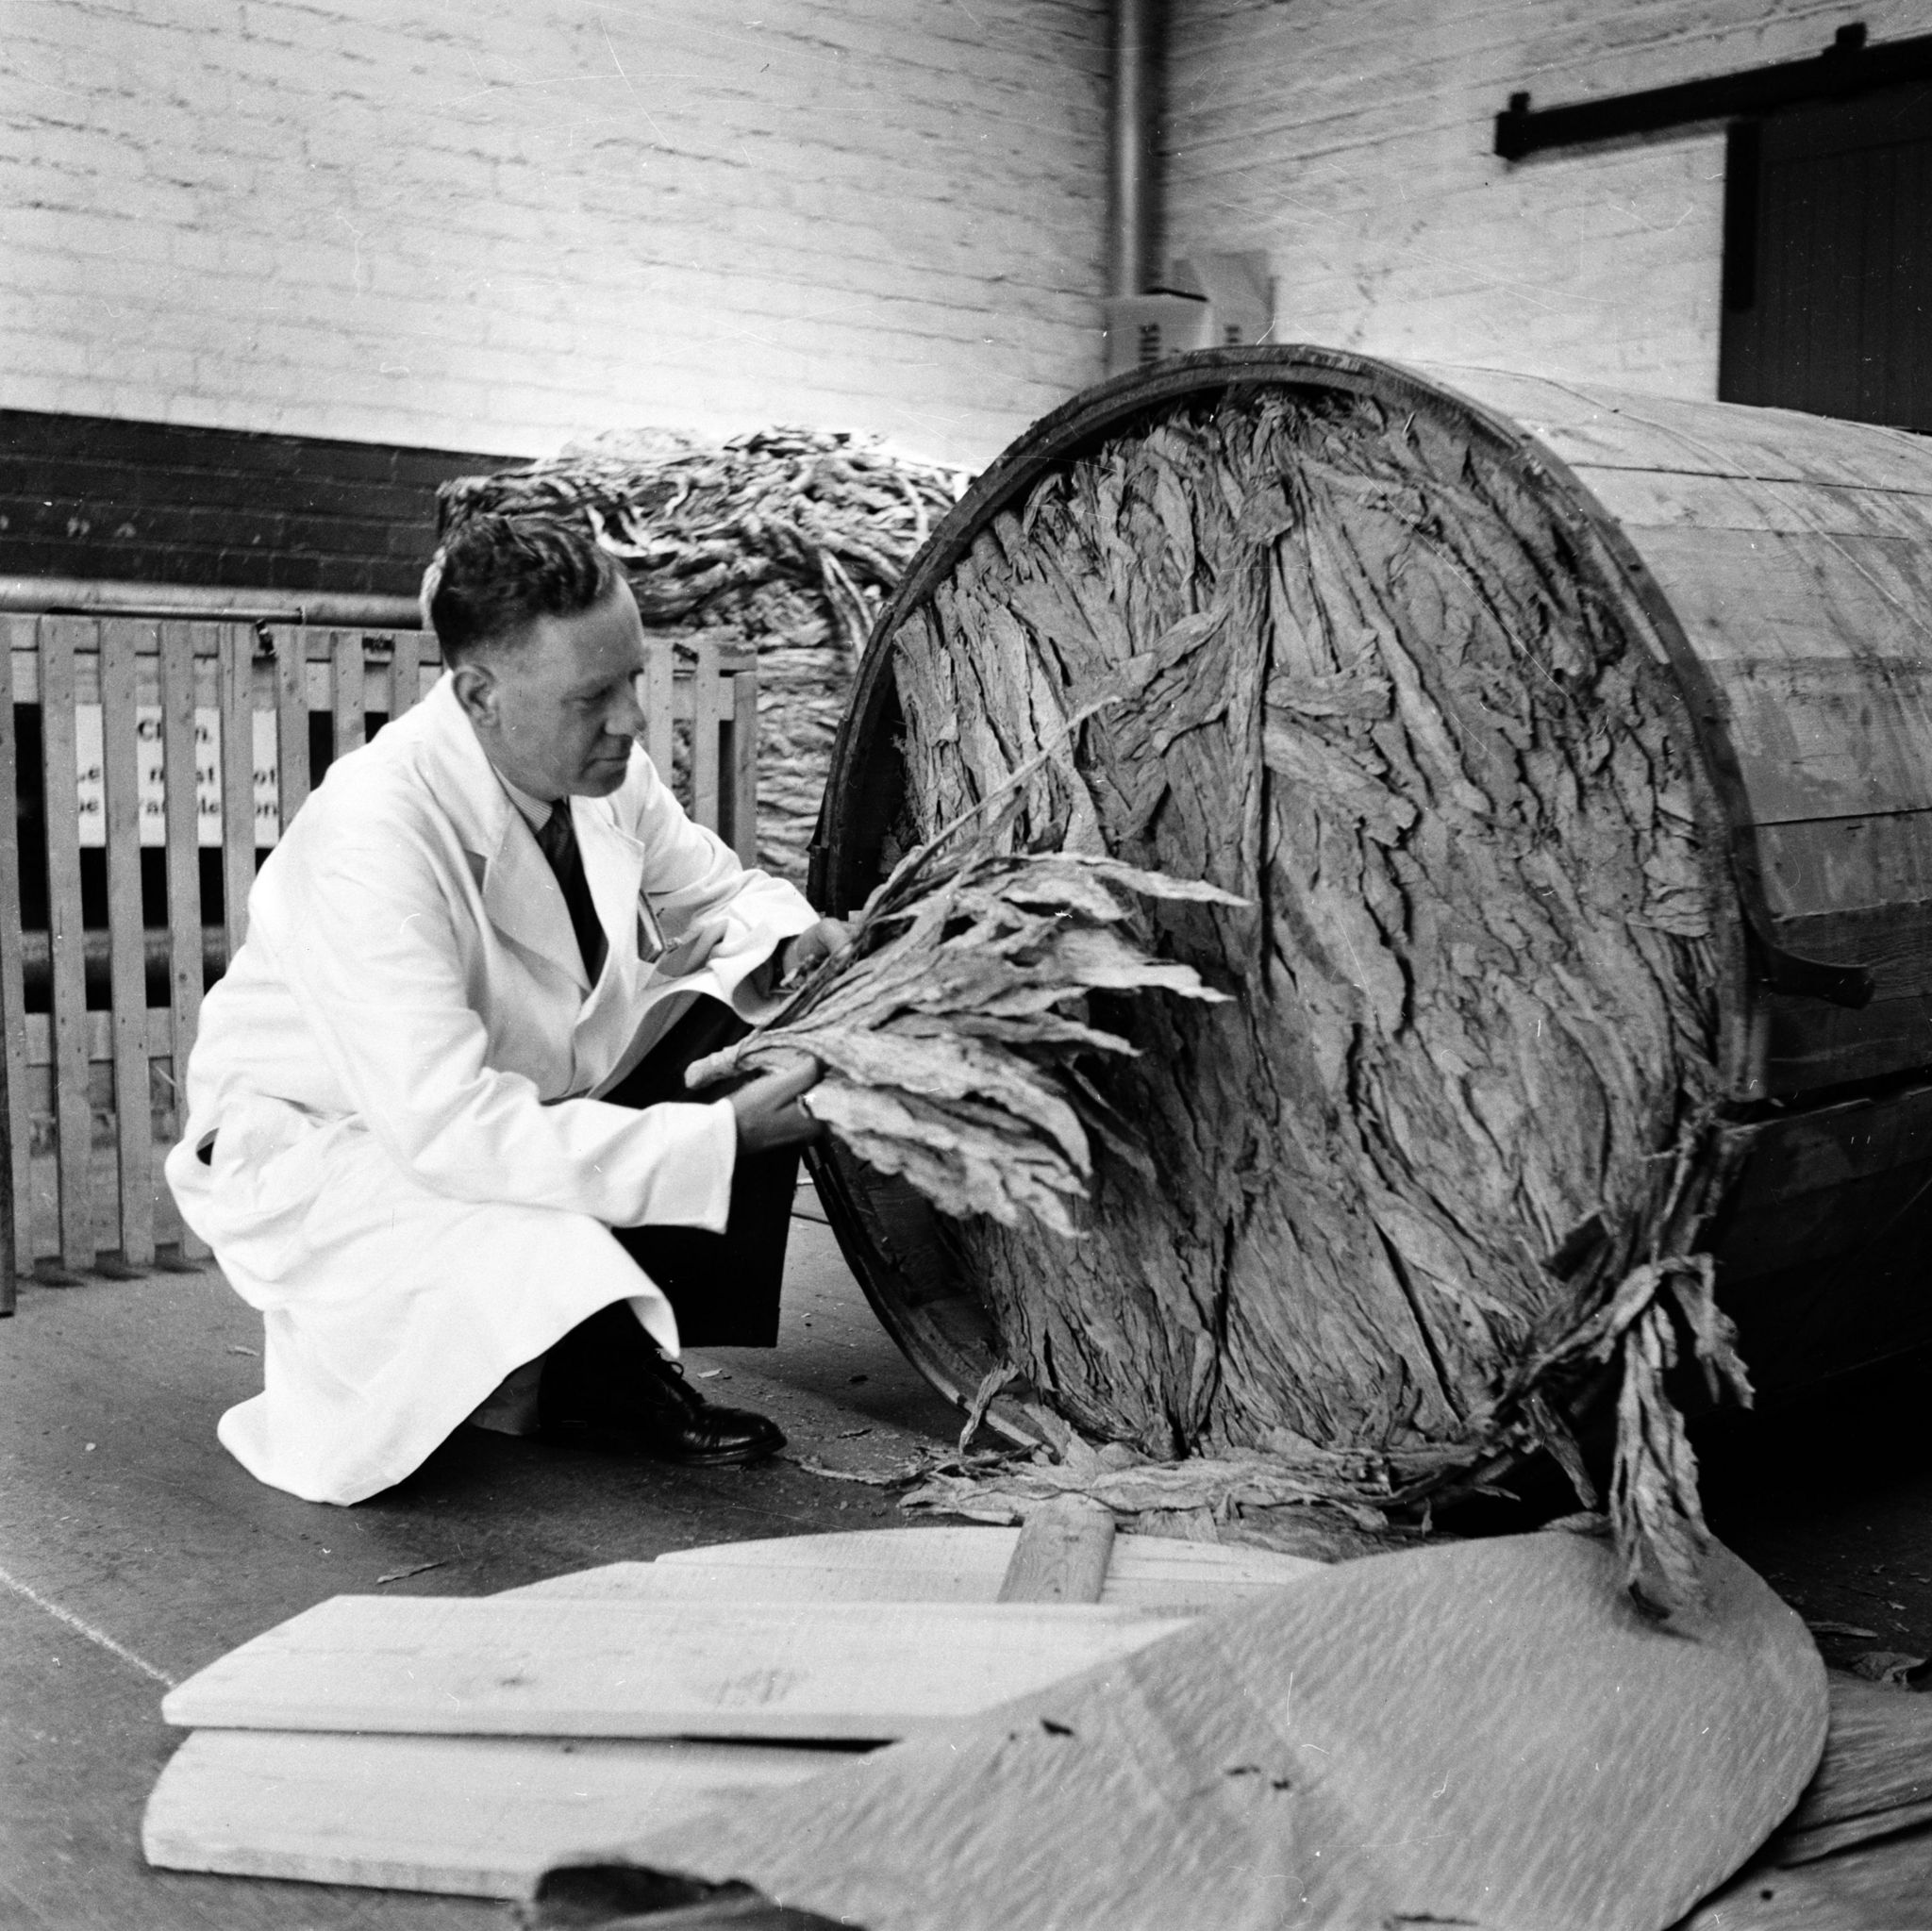 20th August 1955: A barrel of golden leaf tobacco arrives at the Stephen Mitchell and Son cigarette factory in Glasgow. The tobacco industry in Glasgow dates back to the eighteenth century but it collapsed in the 1770s when the American War of Independence ruined the local 'Tobacco Lords'. It was gradually rebuilt and Stephen Mitchell & Son still operates in the city from Alexander Parade, which is the oldest foundation of the tobacco trade, dating back to 1723. Original Publication: Picture Post - 7942 - Let Glasgow Flourish! - pub. 1955 (Photo by Haywood Magee/Picture Post/Hulton Archive/Getty Images)